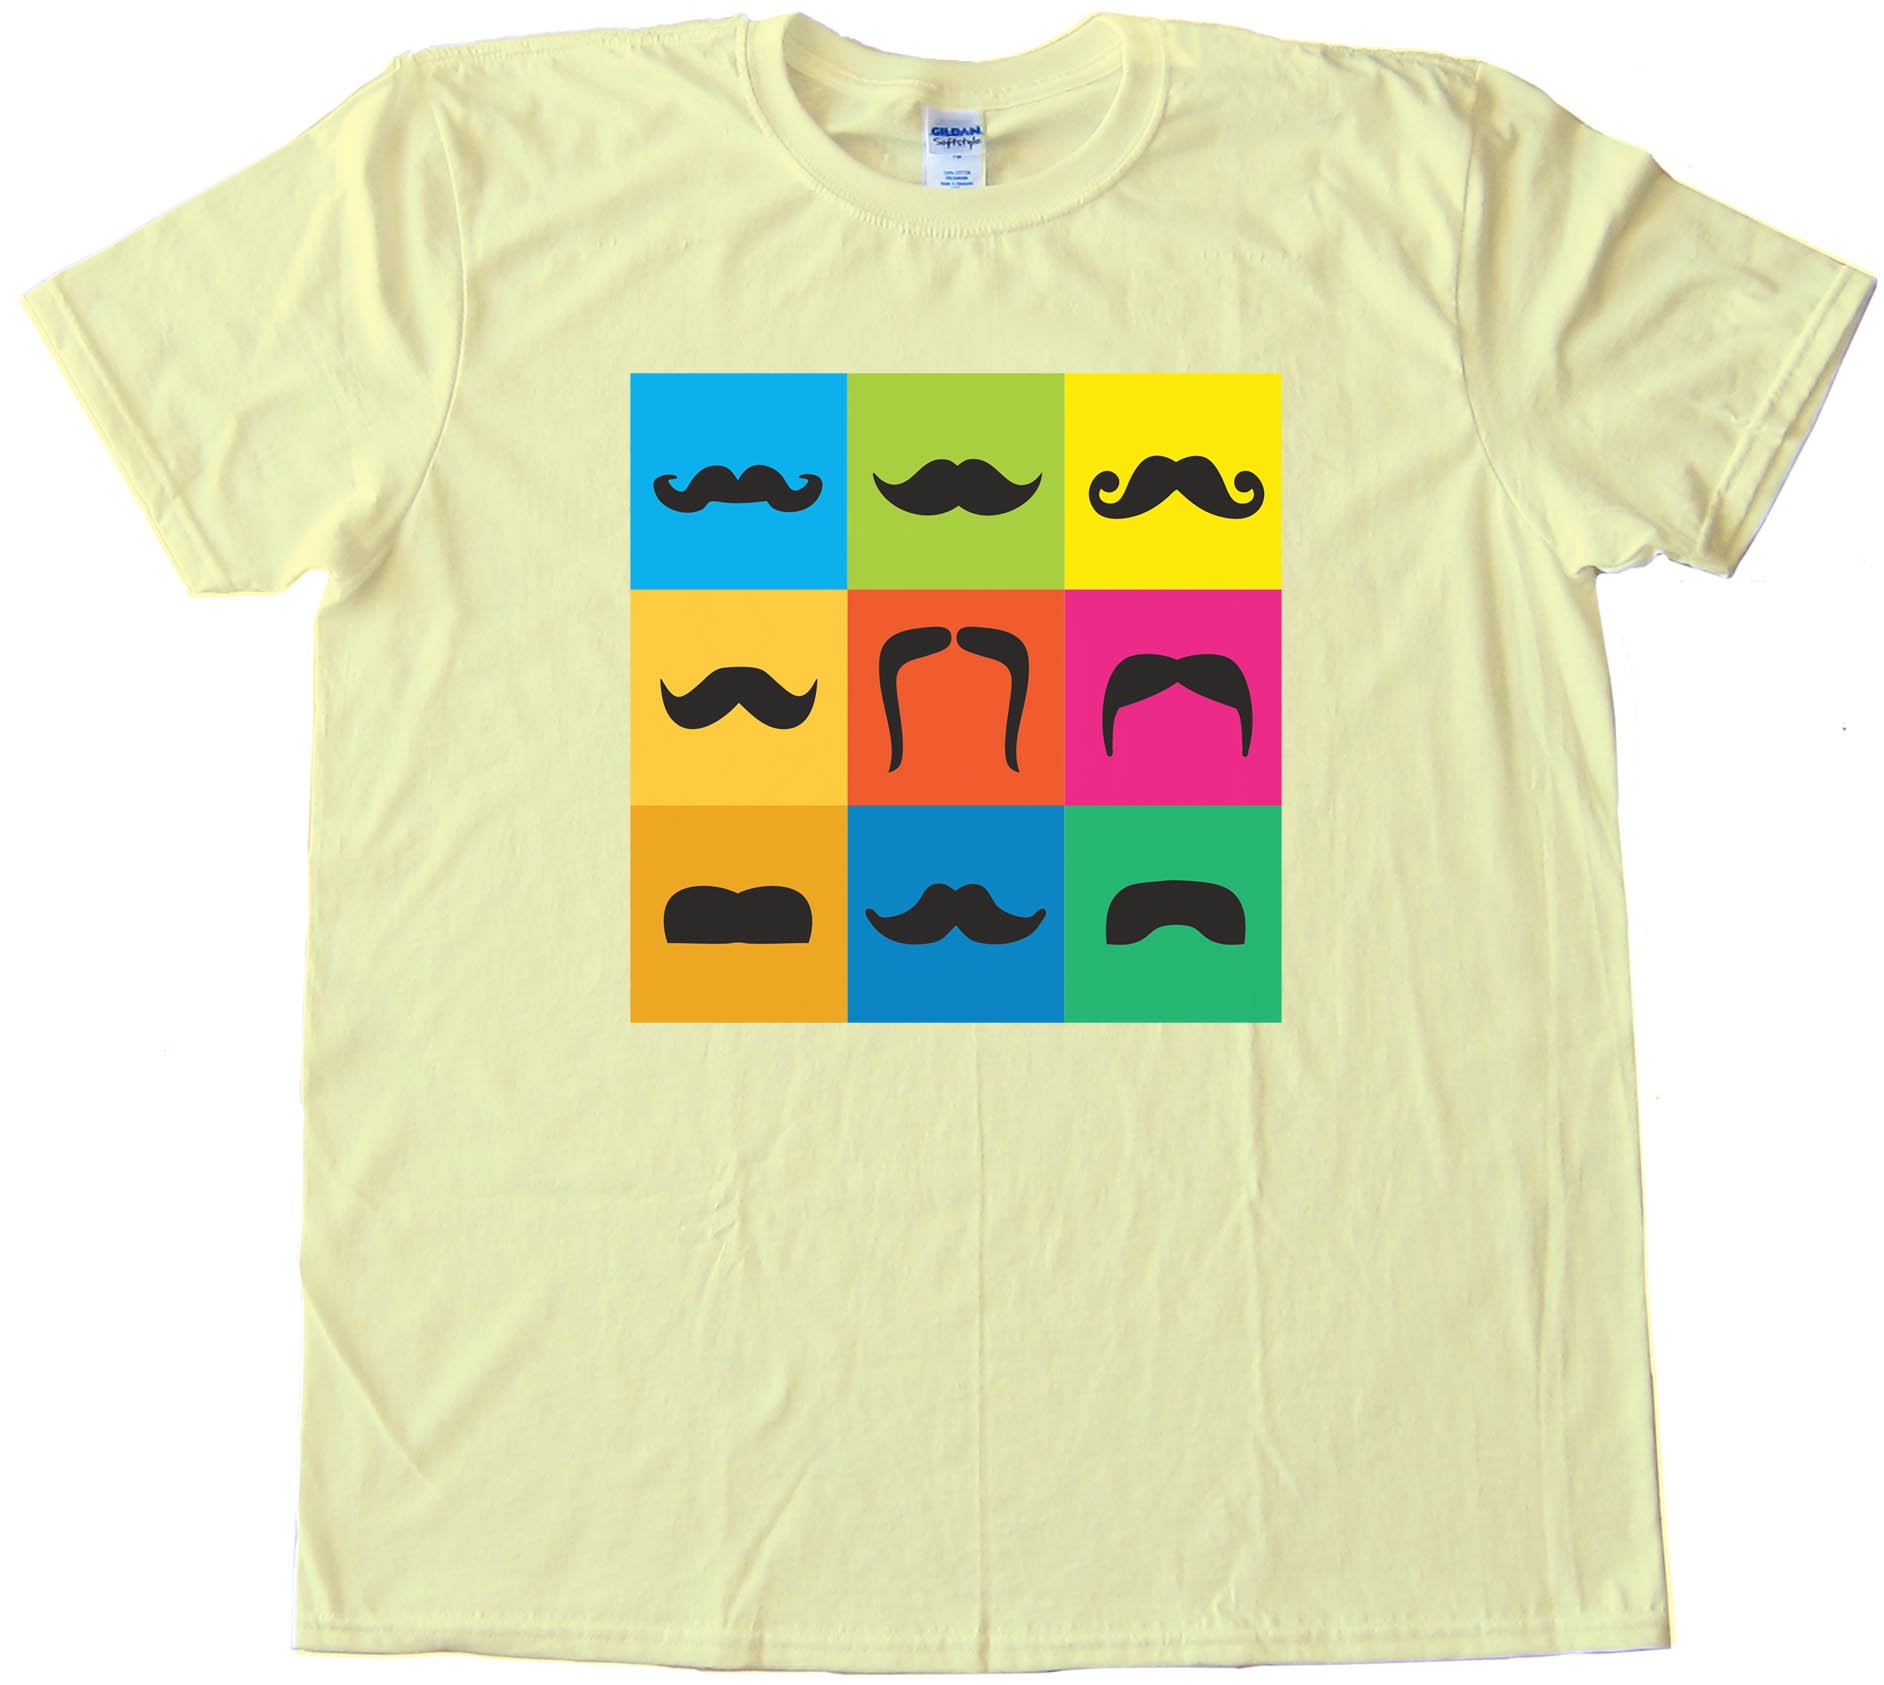 9 Mustache Styles On Colored Boxes - Movember - Tee Shirt